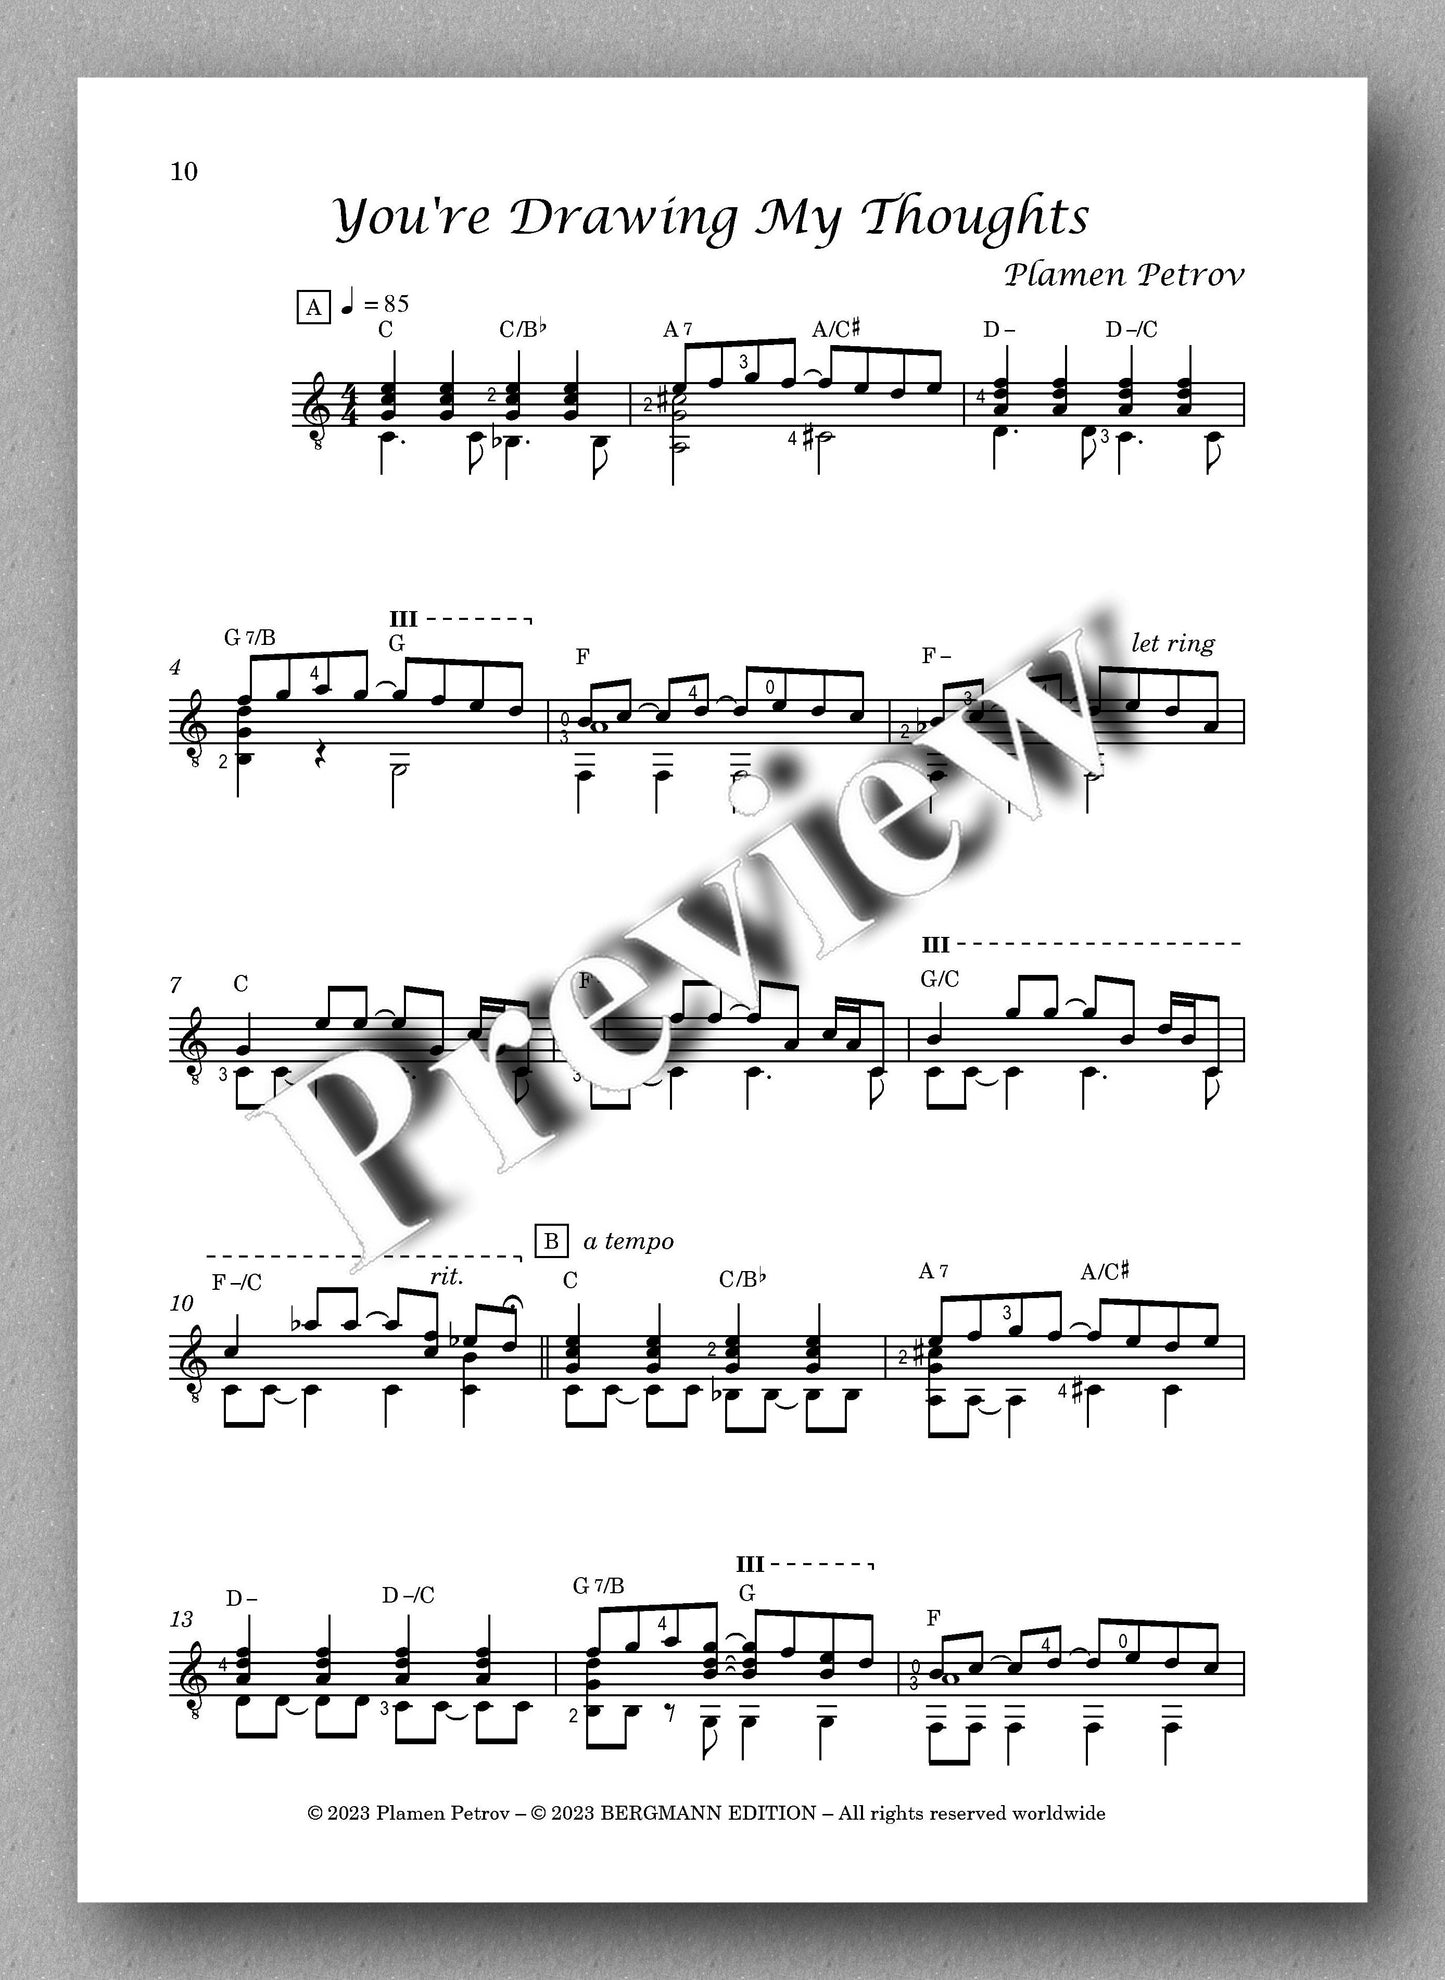 Revelations by Plamen Petrov - preview of the Music score 2